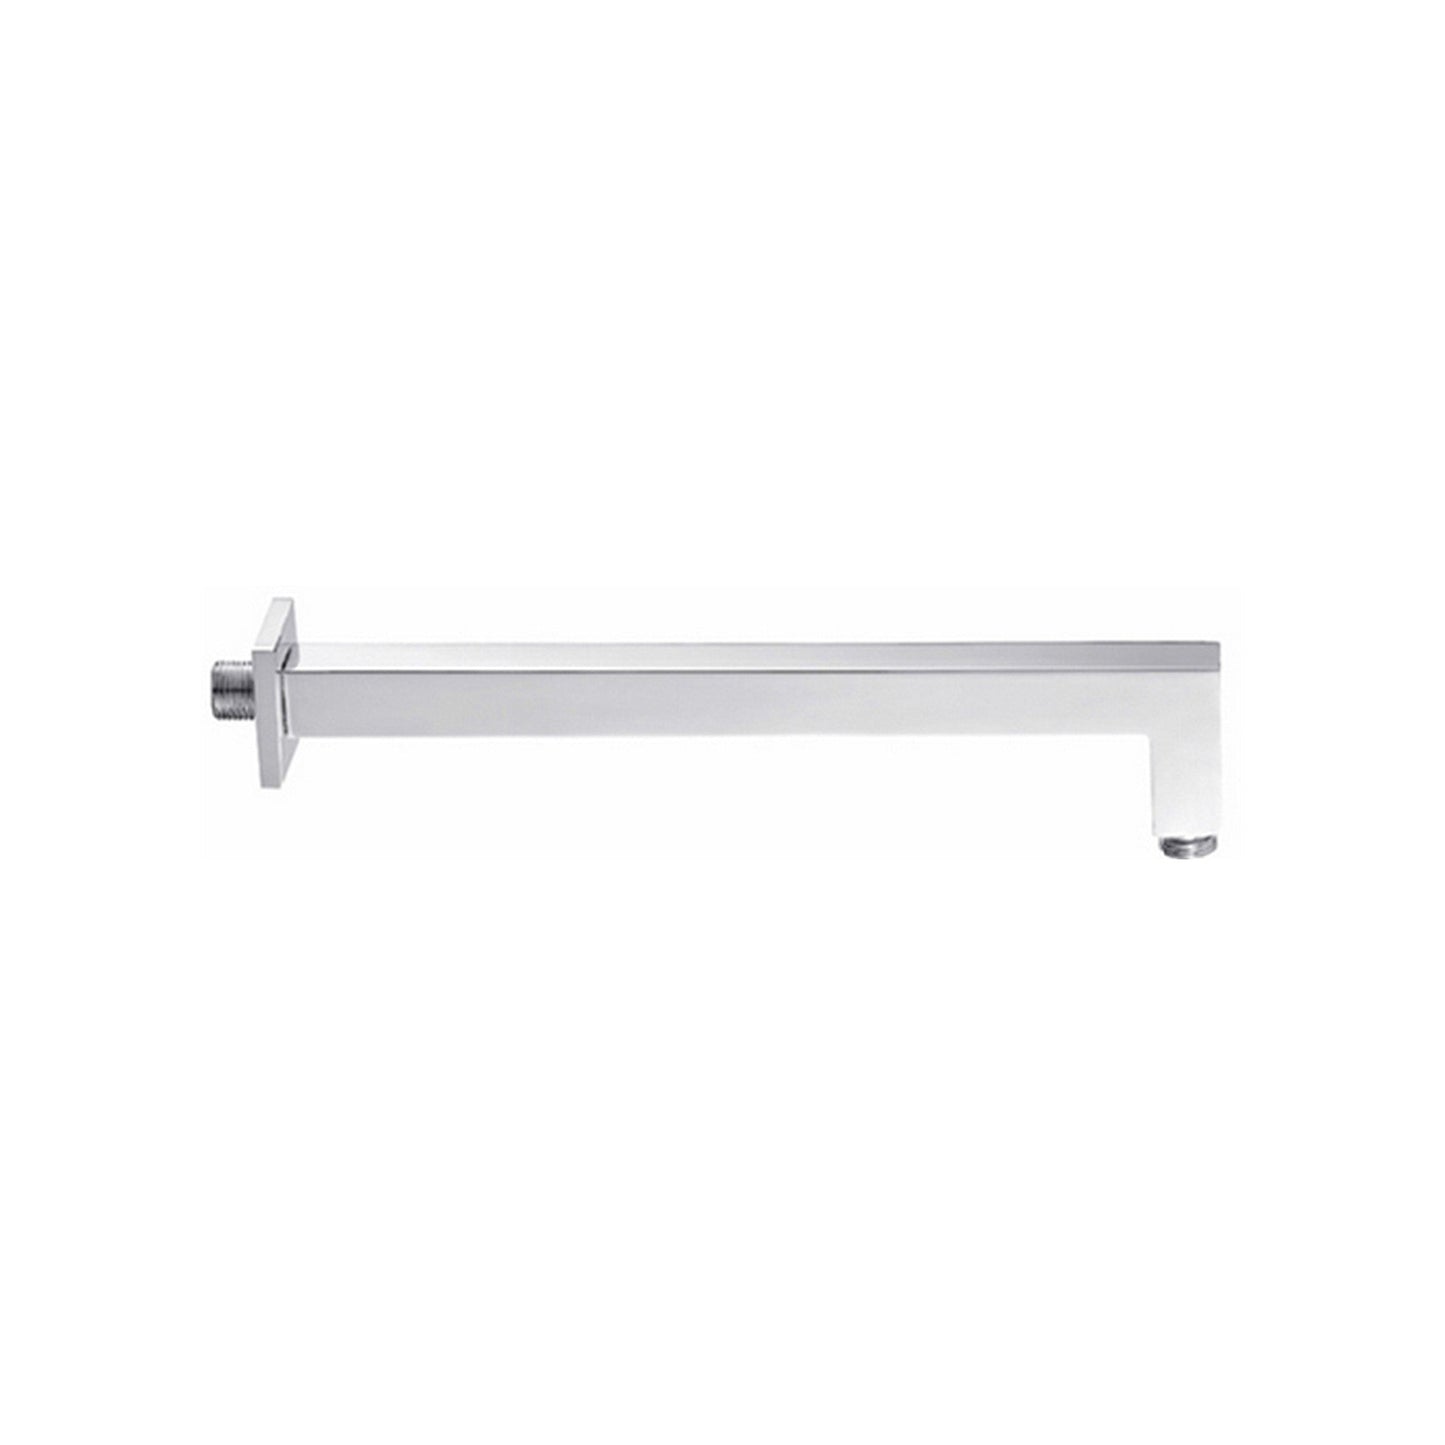 Ratel 14" Square Chrome Wall-Mounted Shower Arm